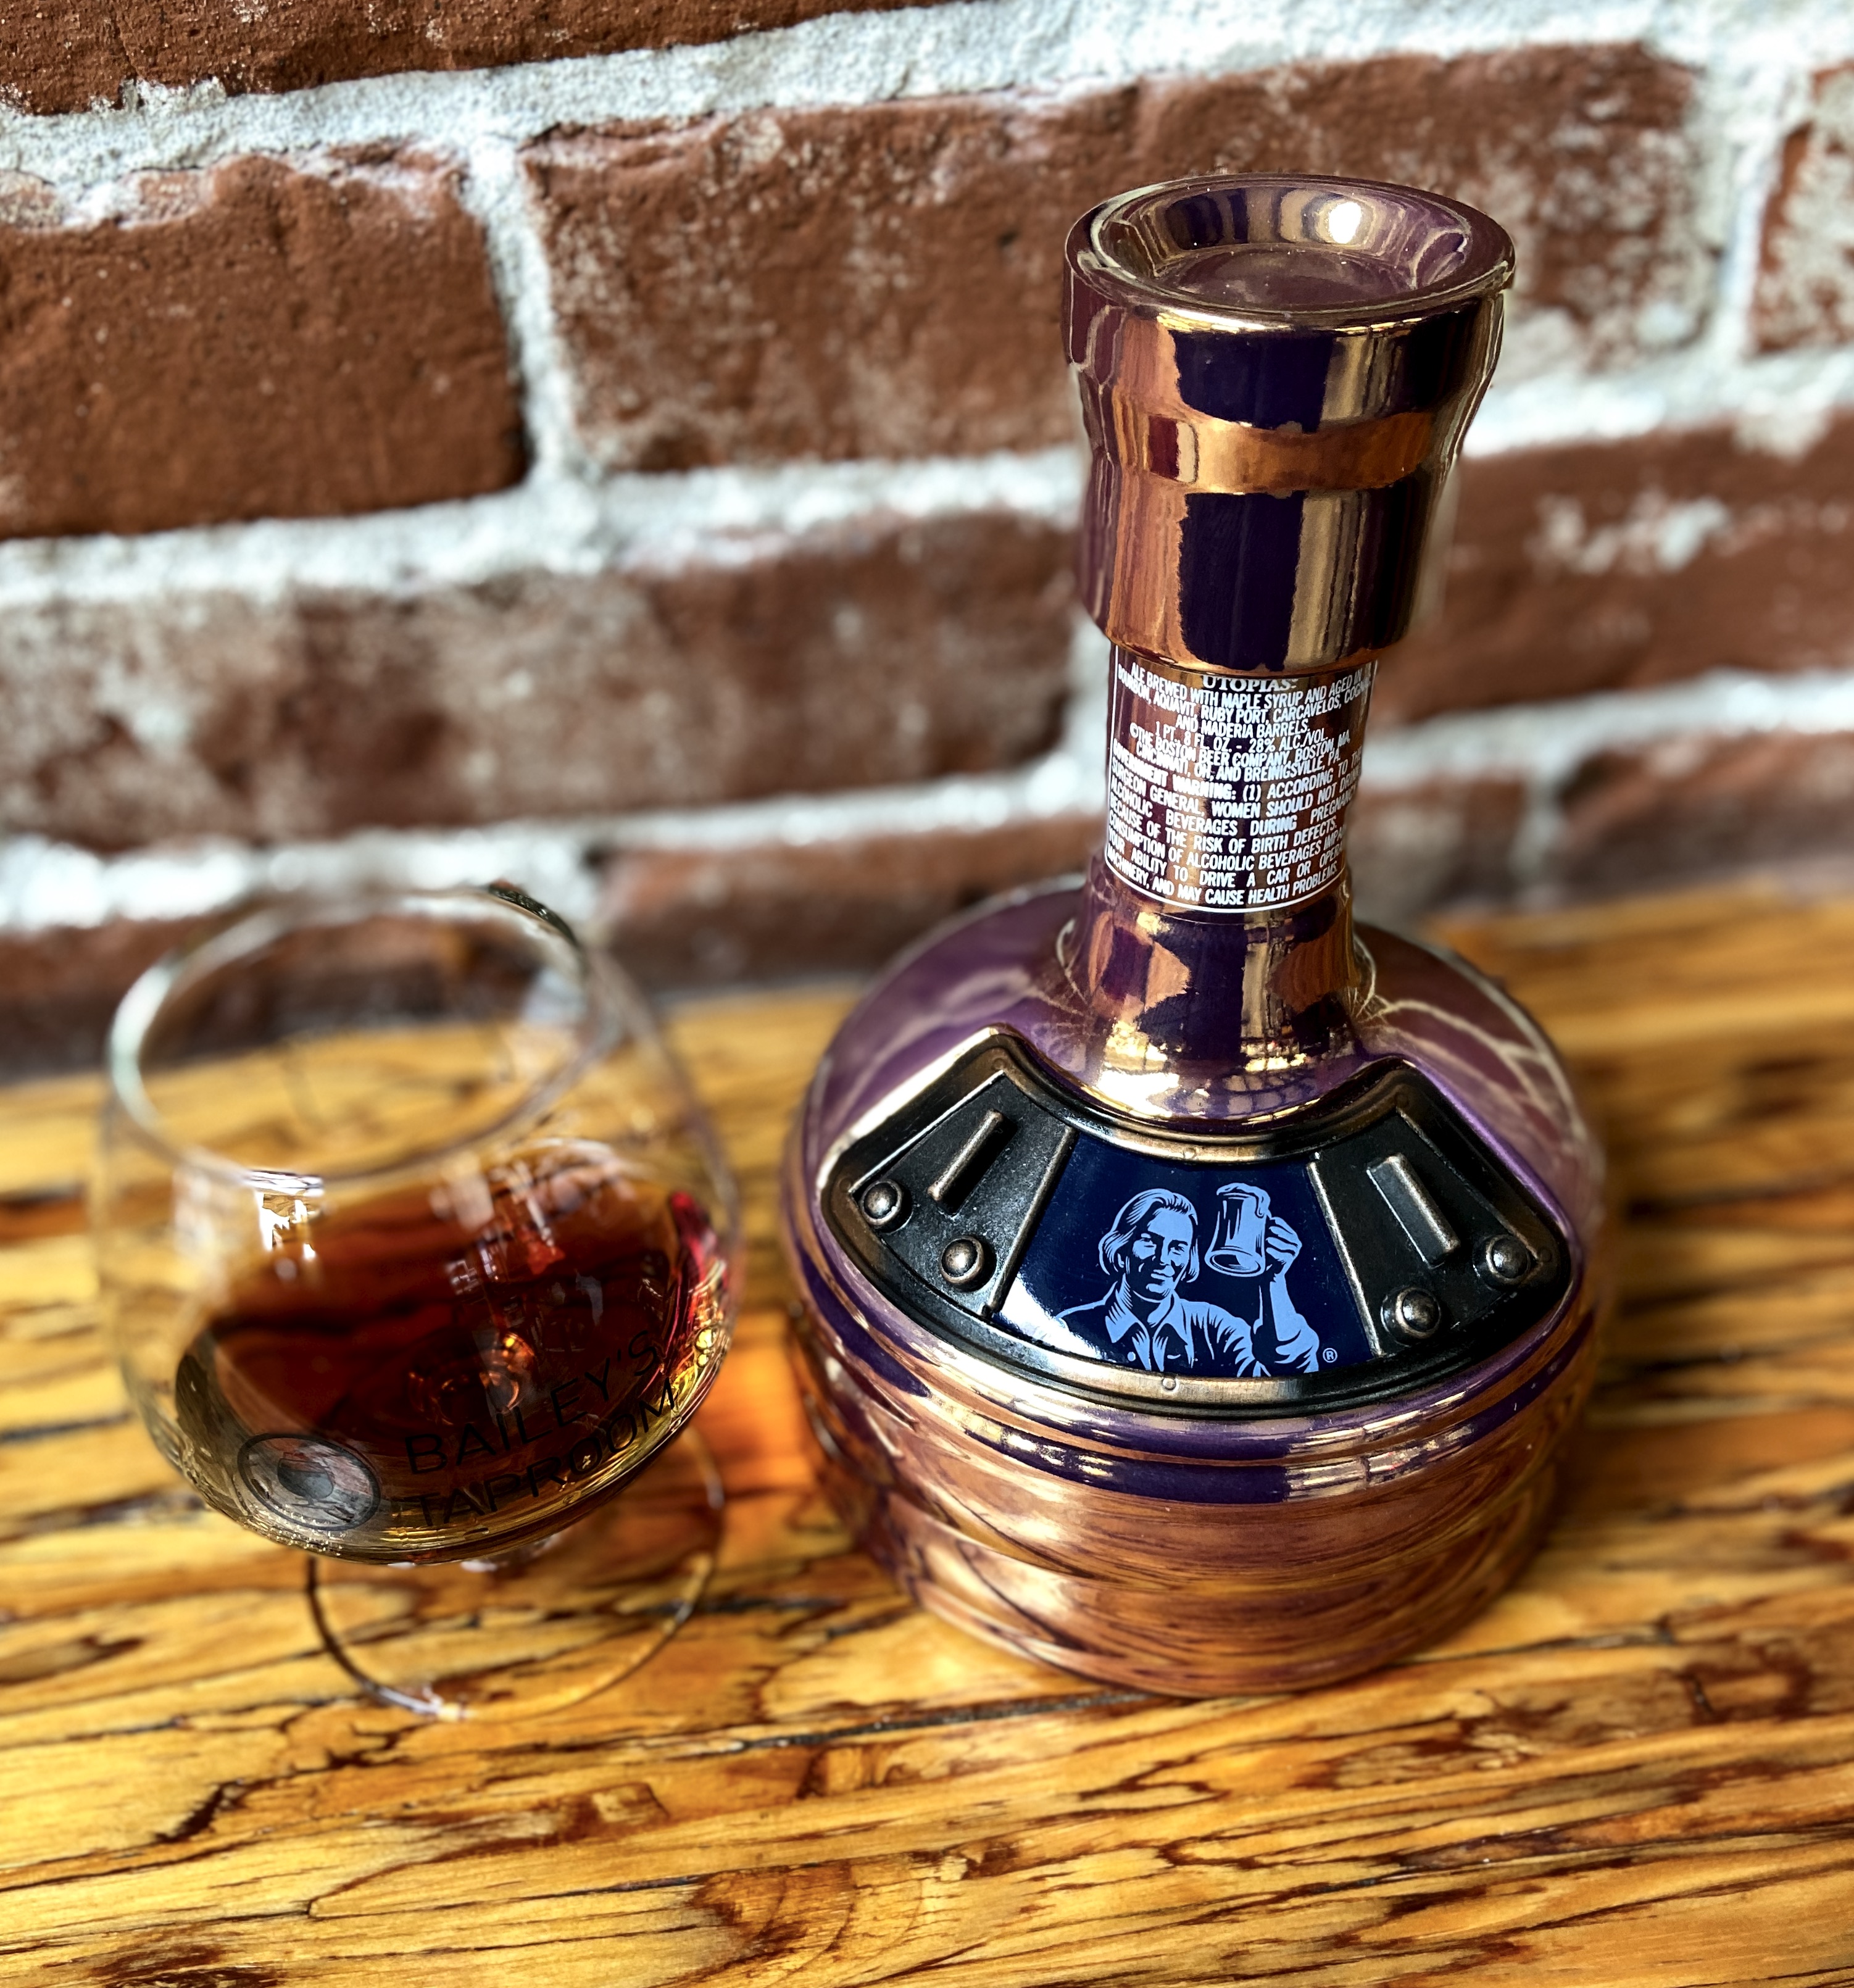 The presentation of the 2019 Samuel Adams Utopias is well done.